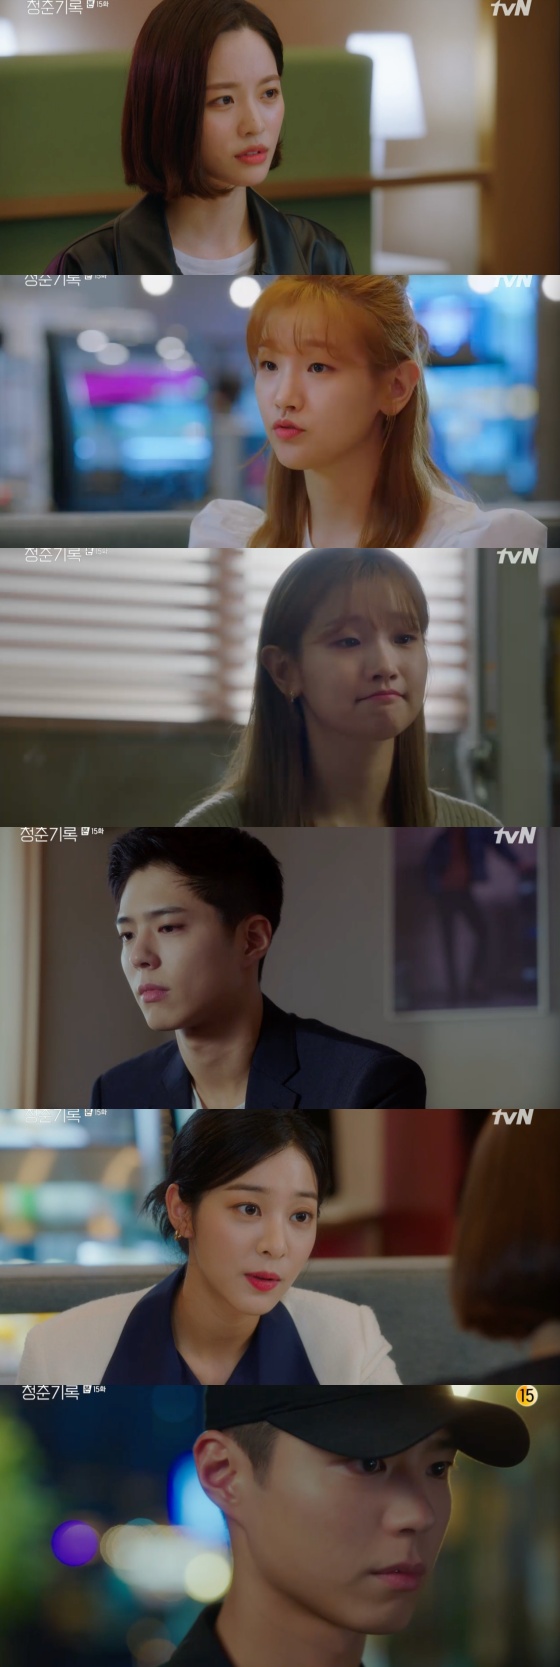 The TVN Monday drama Record of Youth, which was broadcast on the afternoon of the 26th, contained a scene in which Park So-dam was struggling because of Park Bo-gum.On this day, he met Kim Soo-man (Bae Yoon-kyung), who came to him to ask about his relationship with Sa Hye-joon, who was stable, and canceled his promise with Sa Hye-joon.Kim Soo-man pressed for stability, saying that Sa Hye-joon had a picture of him coming out of his house, but he kept it to the end.Kim Soo-man changed his strategy and brought up the story of former GFriend Jin Ji-a (Sul In-ah).Kim Soo-man said that Jeong Ji-a and Sa Hye-joon were right, and he was disturbed by the feeling of sadness and distance in the busy Sa Hye-joon.After that, I was laughing at the couple shoes presented by Sa Hye-joon, who was stable, but I could not be happy when I remembered Sa Hye-joon.In the end, I met Sa Hye-joon at the office of Lee Min-jae (Shin Dong-mi) to avoid the eyes of stable people. I said goodbye to Sa Hye-joon, who was stable, and Sa Hye-joons expression, which I had been delighted to meet for a long time, hardened.Do you remember saying that you will never say sorry if you love me? And then said, Do you know how many times I said sorry when I met you?Sa Hye-joon stepped out to take the stable to the seat and tried to ride the elevator together, but he was alone in the elevator, saying stop now.Soon after, Jeong Ji-a came to An Jeong-has makeup shop.Jing Ji-a said, I will not meet if I do not want to see Hye-joon, and said, I am also a GFriend.Meanwhile, Jeong Ji-a met with Sa Hye-joon and praised him for meeting him. Sa Hye-joon, who was disturbed by the story of Ahn Jeong-ha, eventually went to Ahn Jeong-ha.Why are you here? asked a surprised and stable person, and Sa Hye-joon said, I can not break up with you. It is noteworthy what will happen to the relationship between the two in the future.